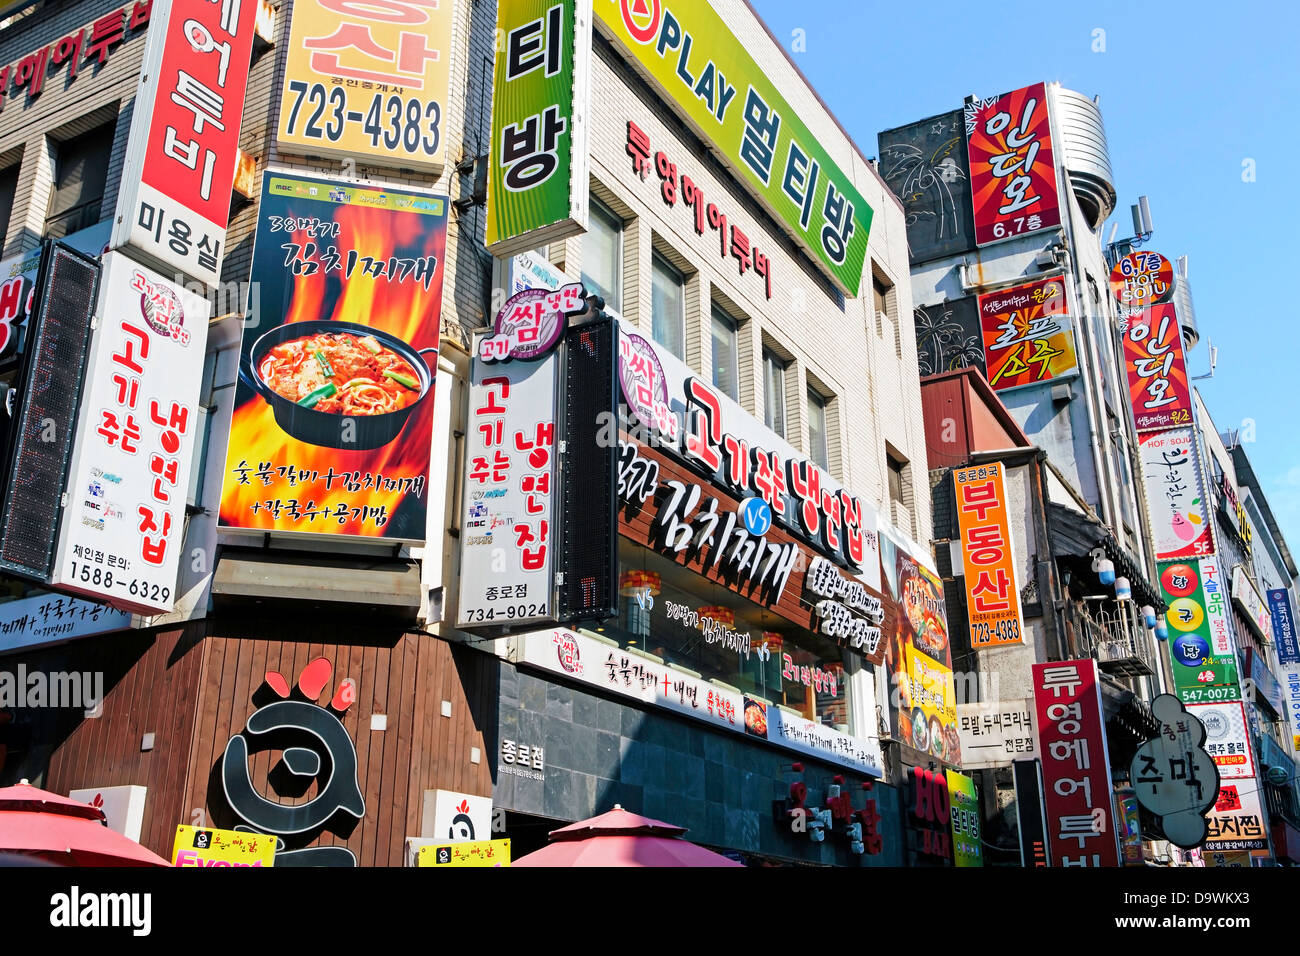 Advertising signs in the entertainment district of Myeong-dong, Seoul, South Korea, Asia Stock Photo